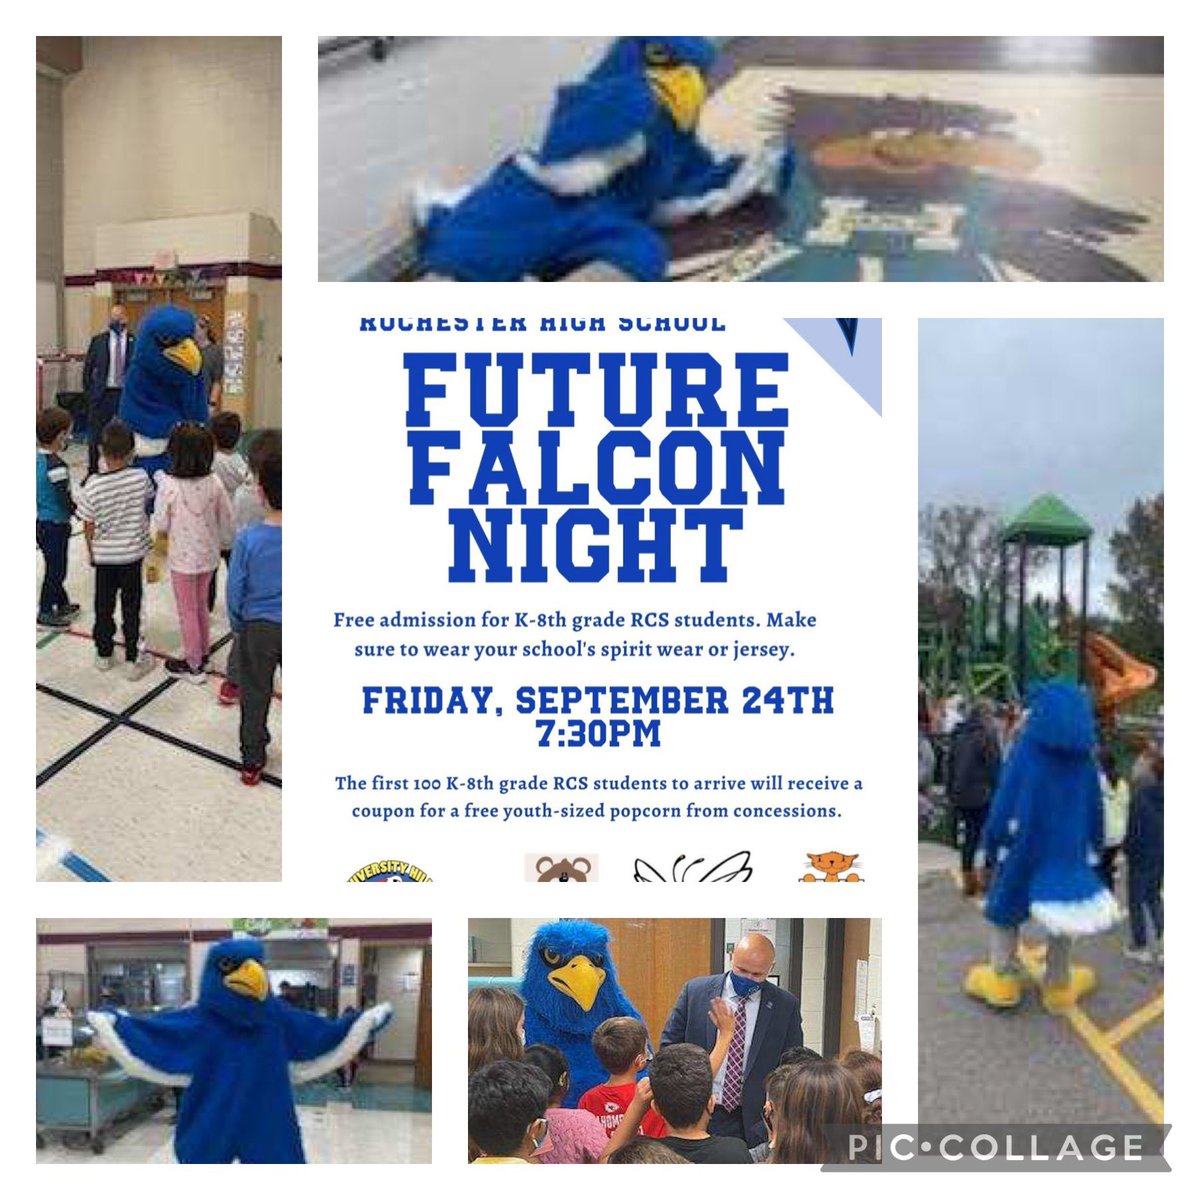 Freddie the Falcon stopped by to say “Hi” and invite our future Falcons to the game tomorrow! #RCSPride